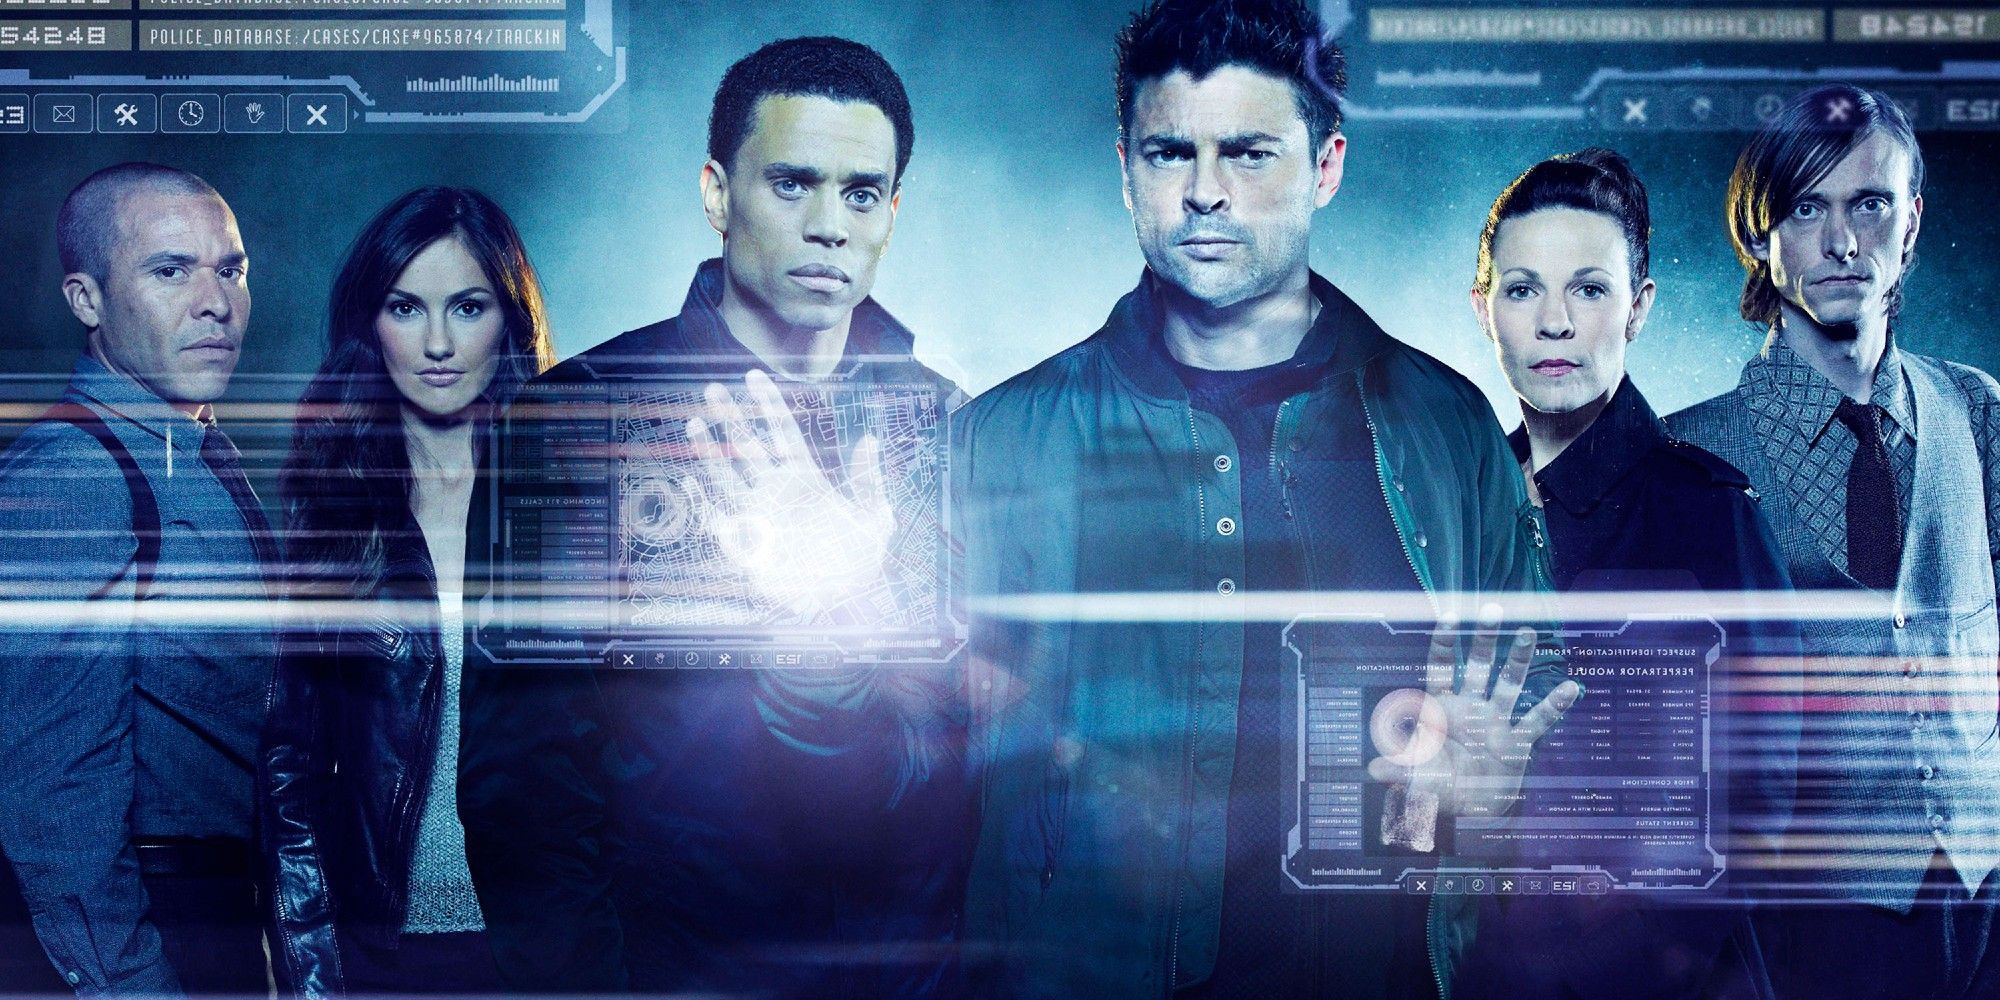 Cast of Almost Human